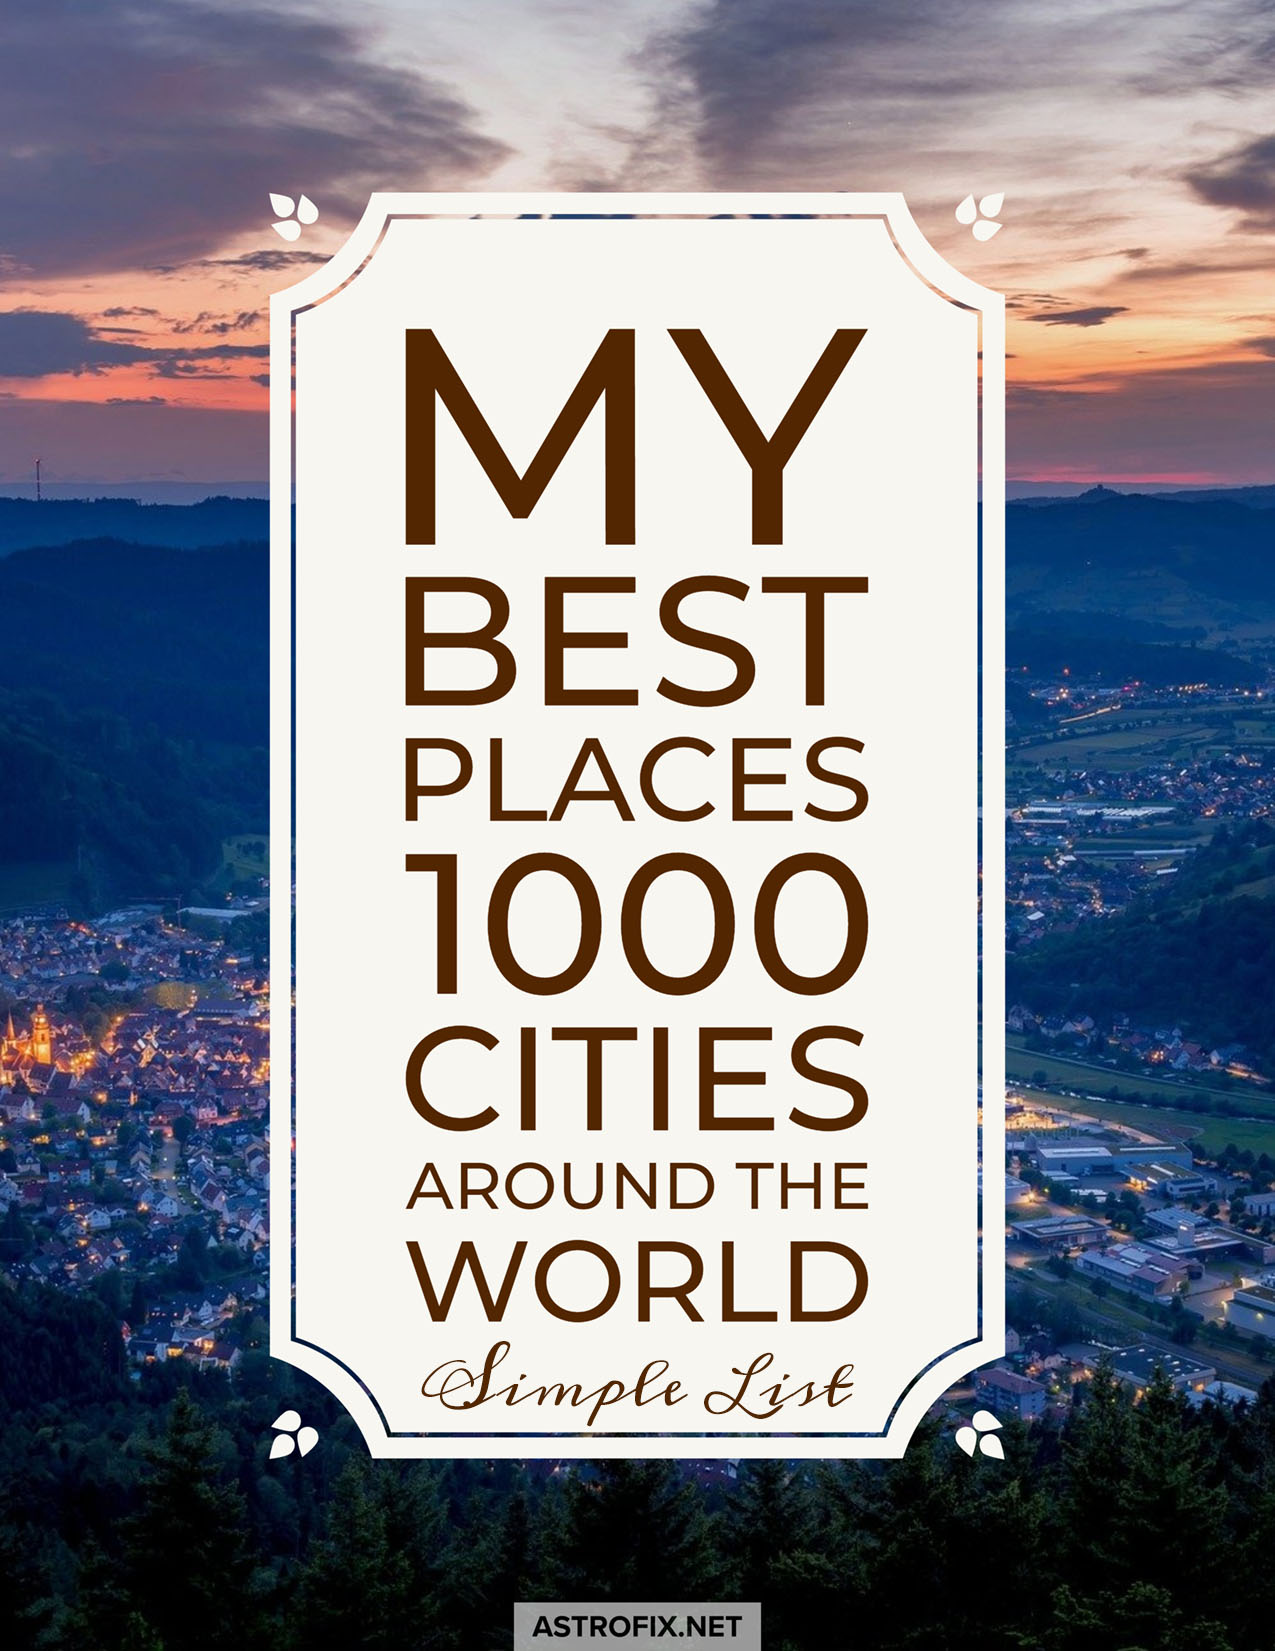 My Best Places 1000 Cities Around the World Astrology Report